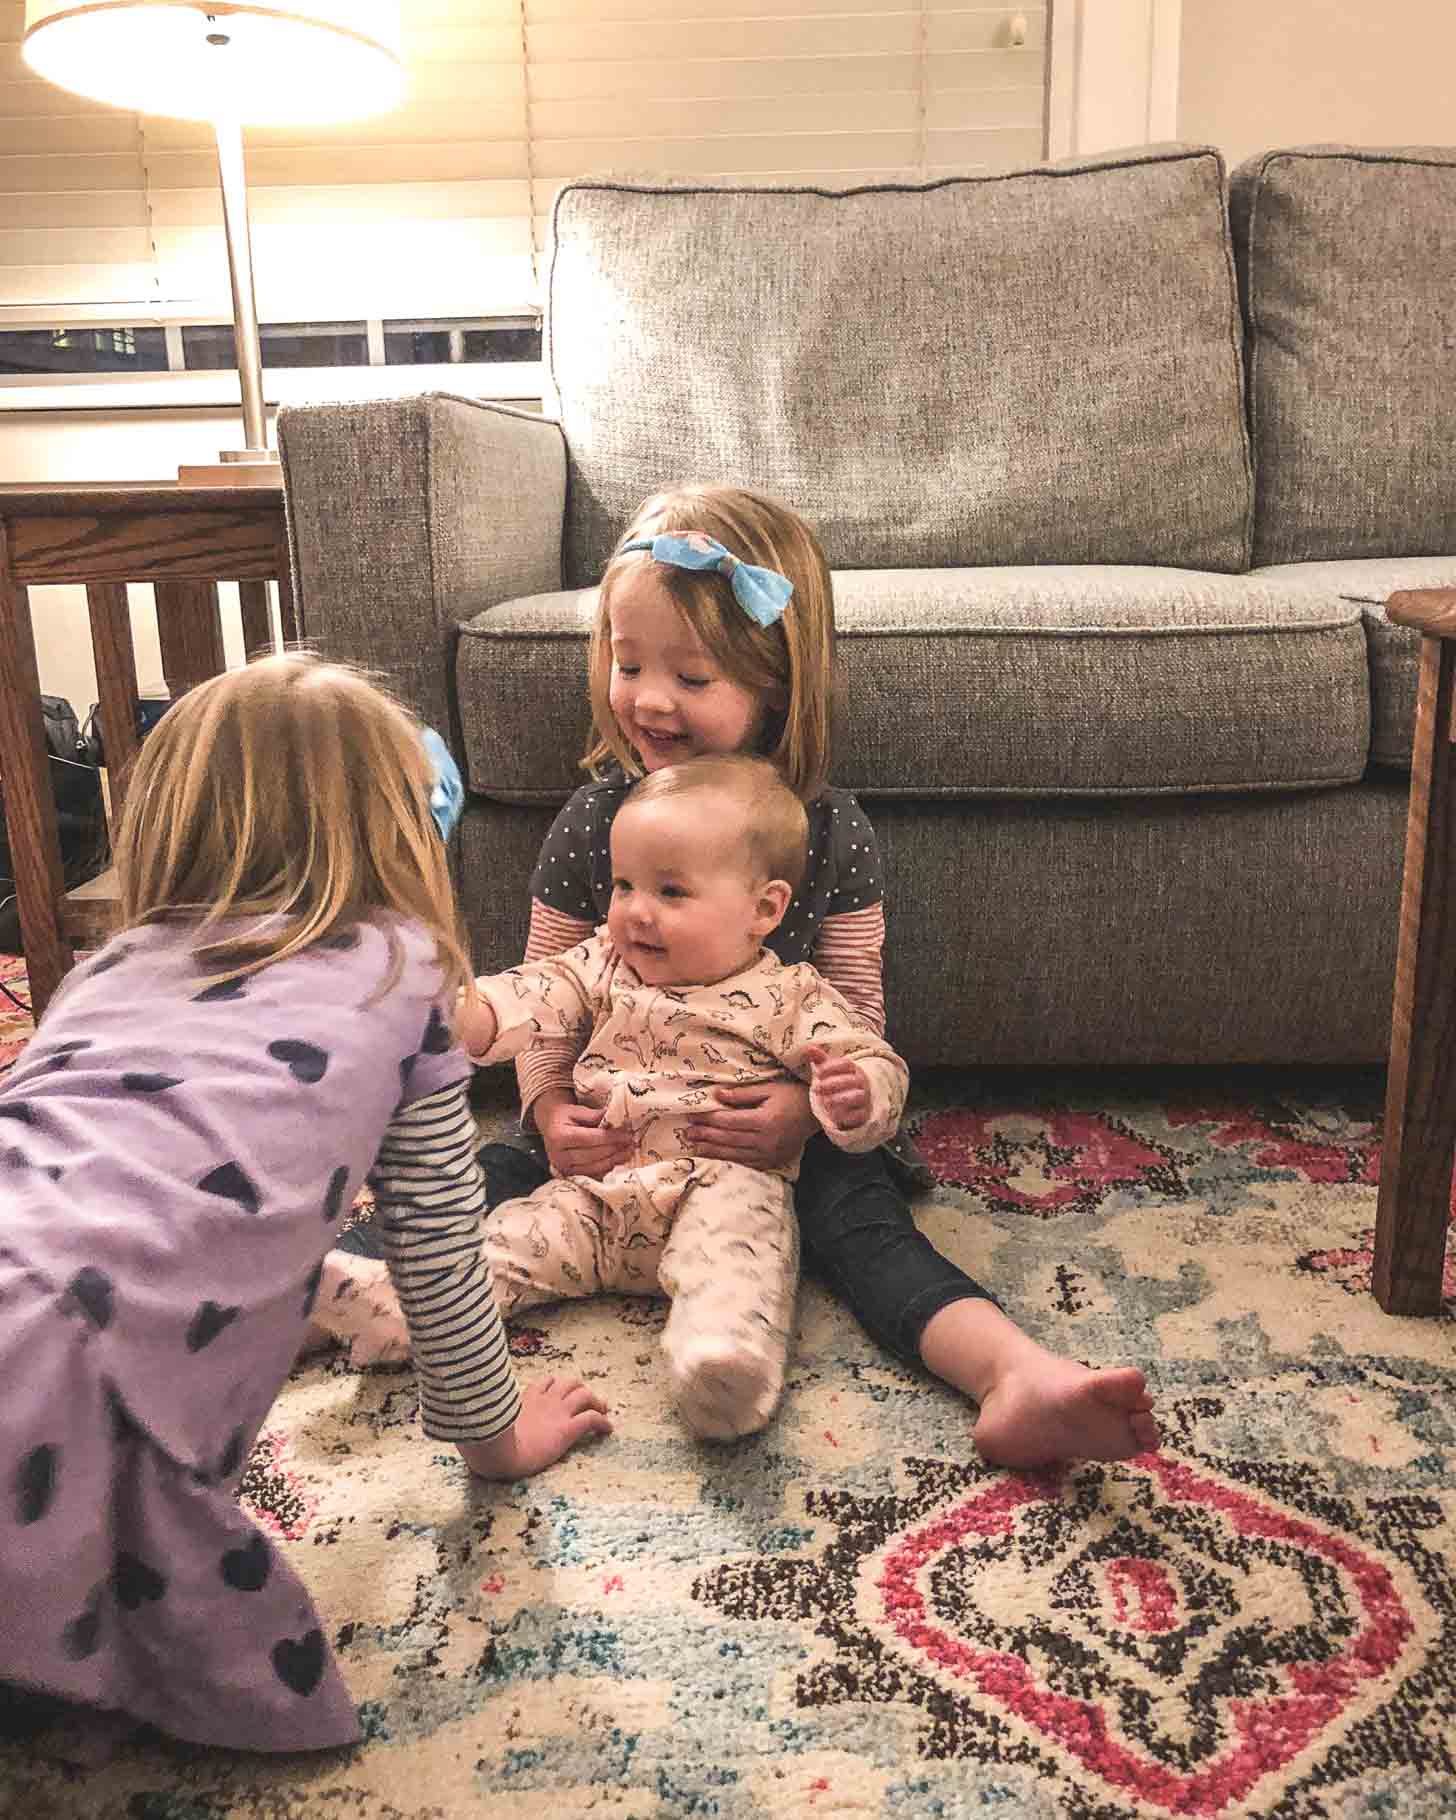 Two girls and a baby on a rug